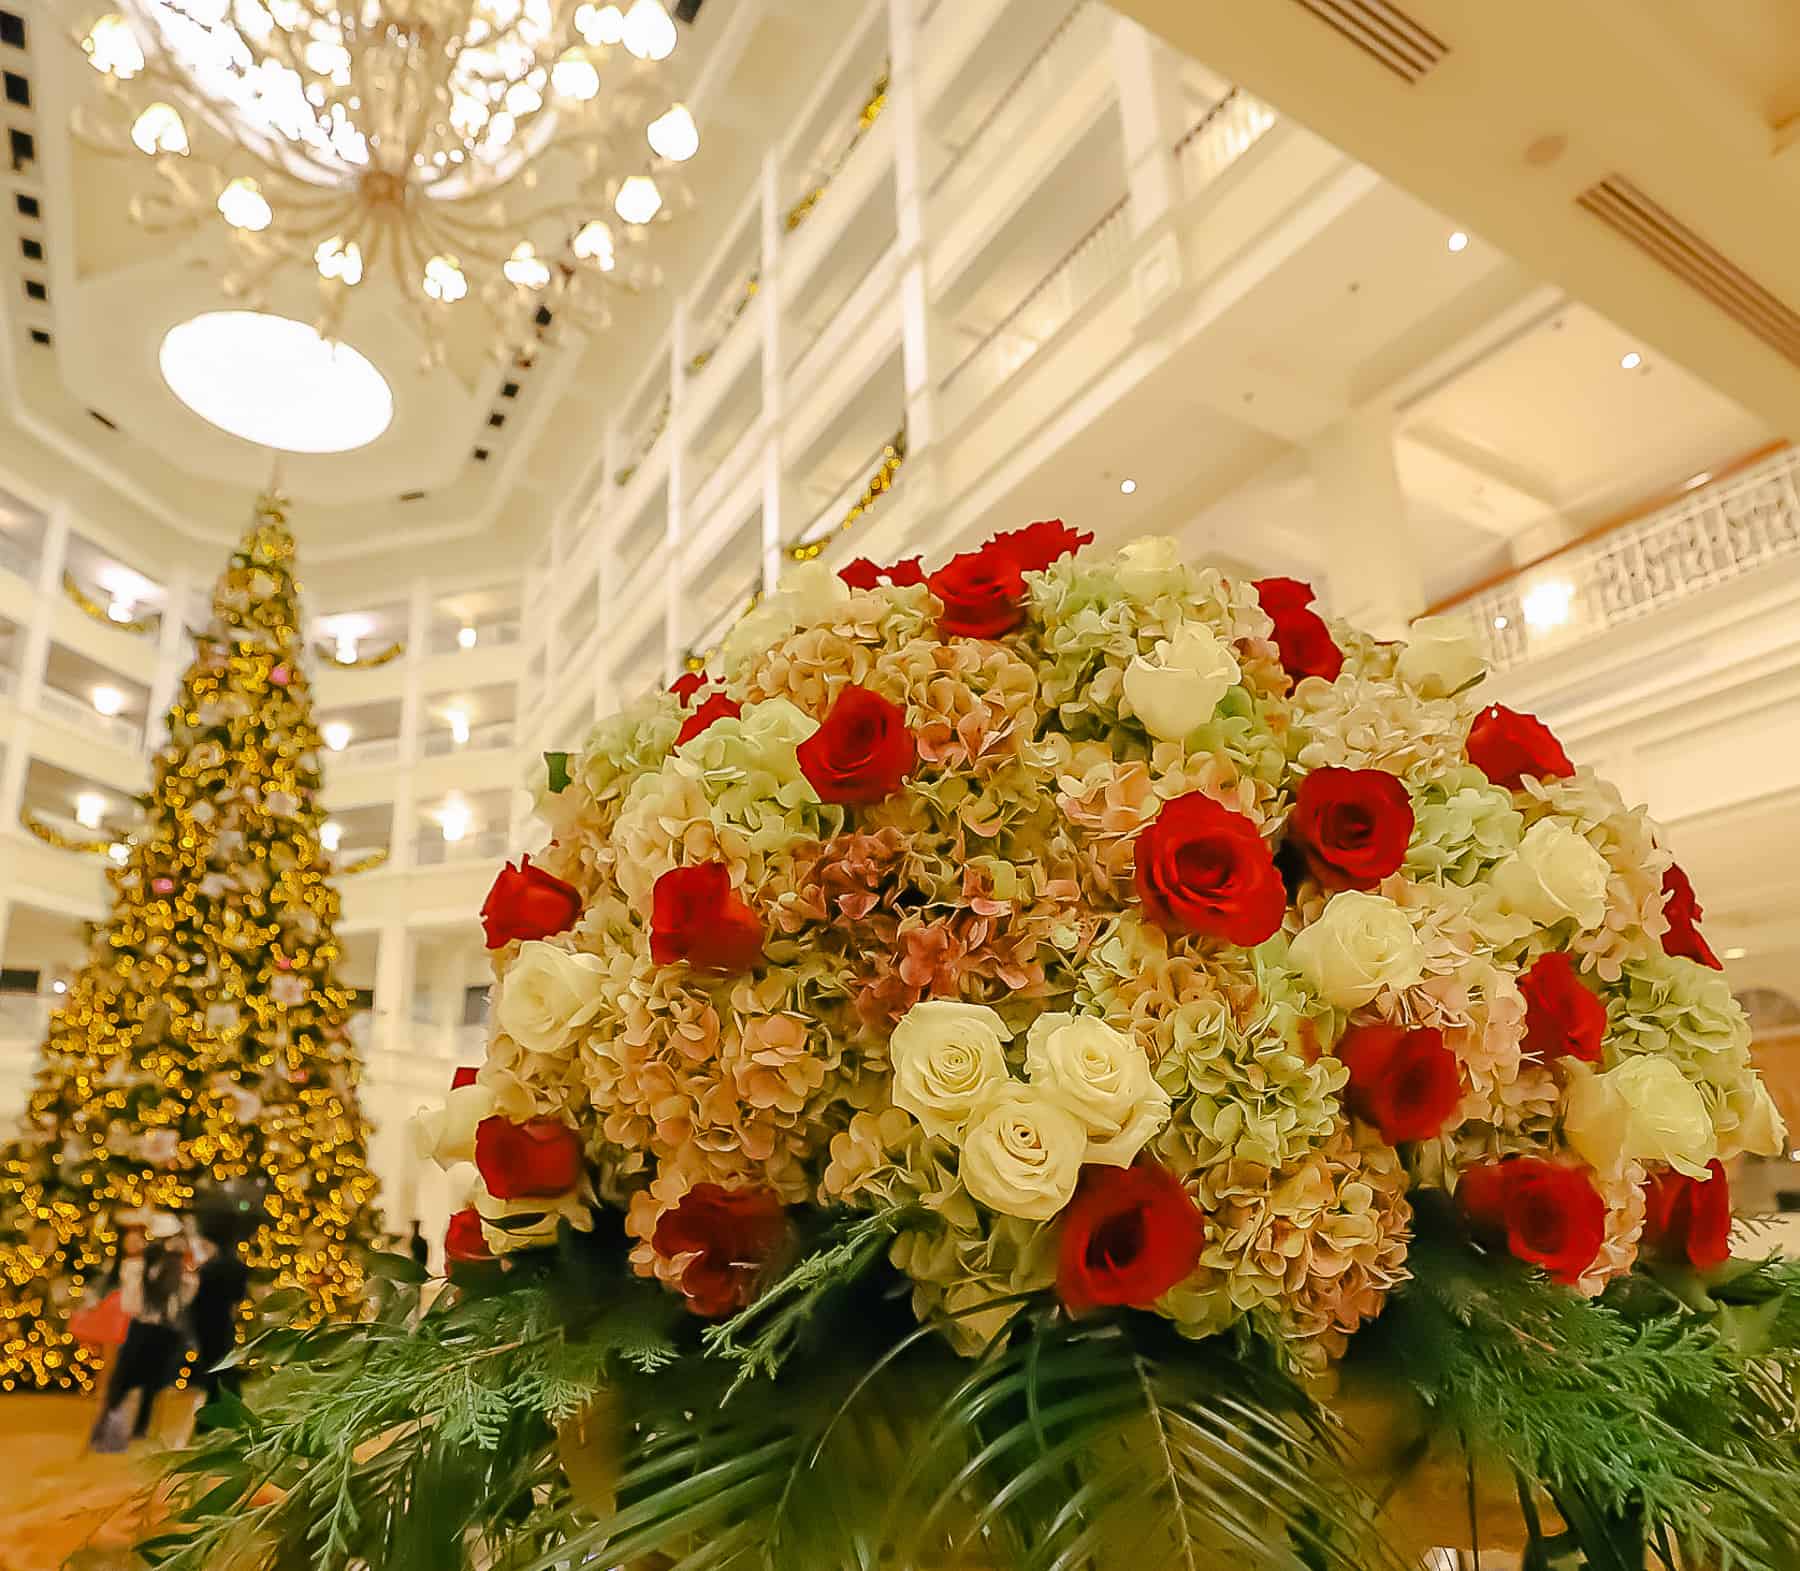 This picture of the flower arrangement is at an angle that shows a hidden Mickey made of white roses. 